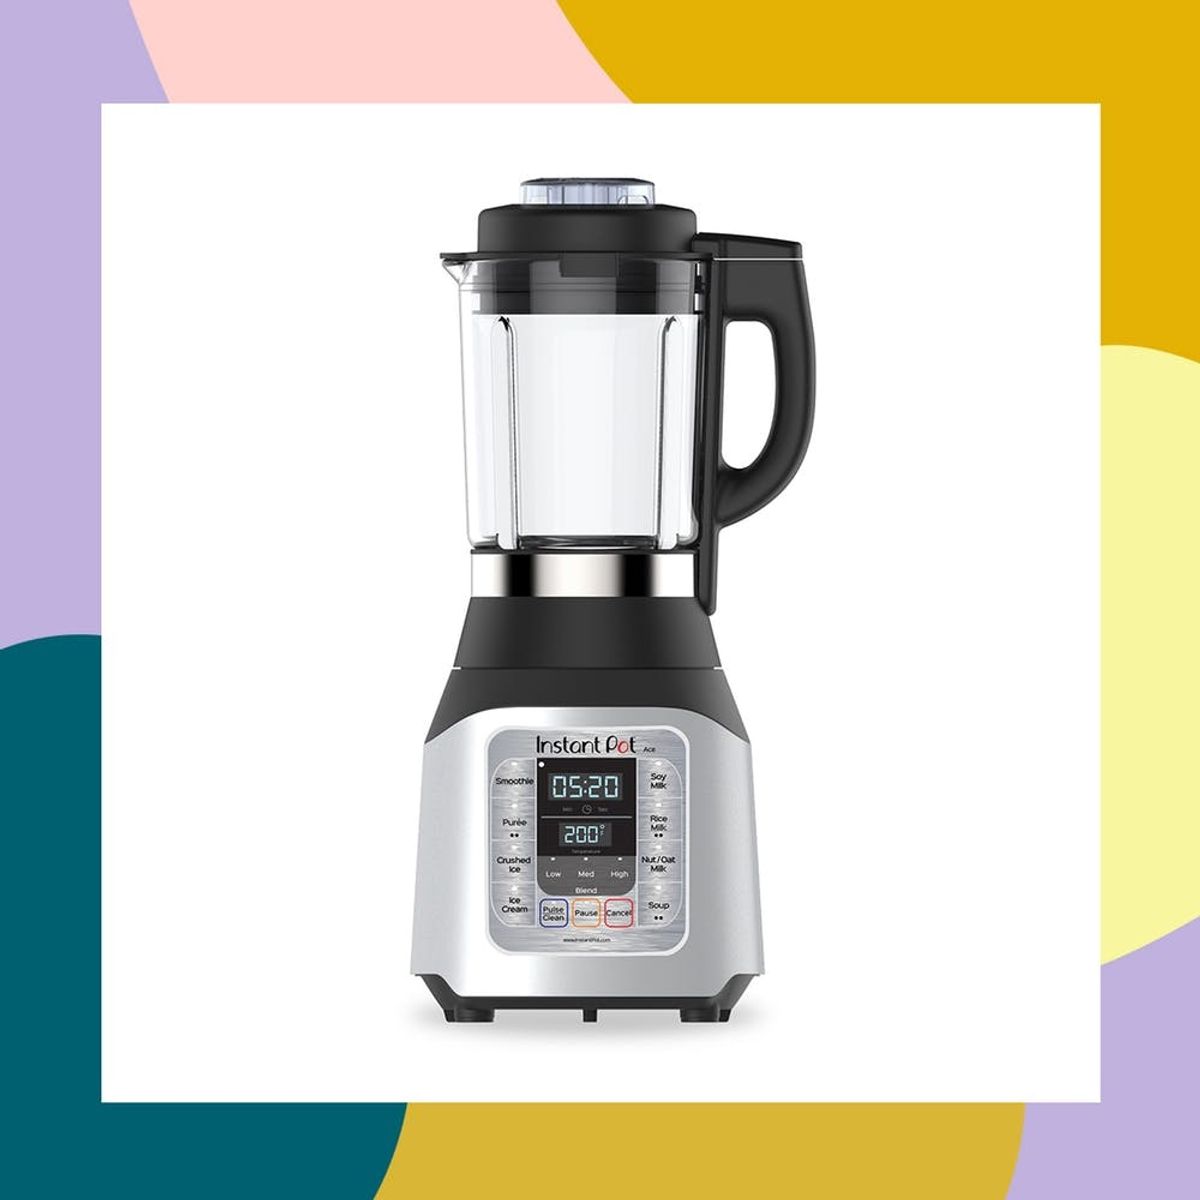 Instant Pot Launches Another Exciting New Product — Meet the Cooking Blender